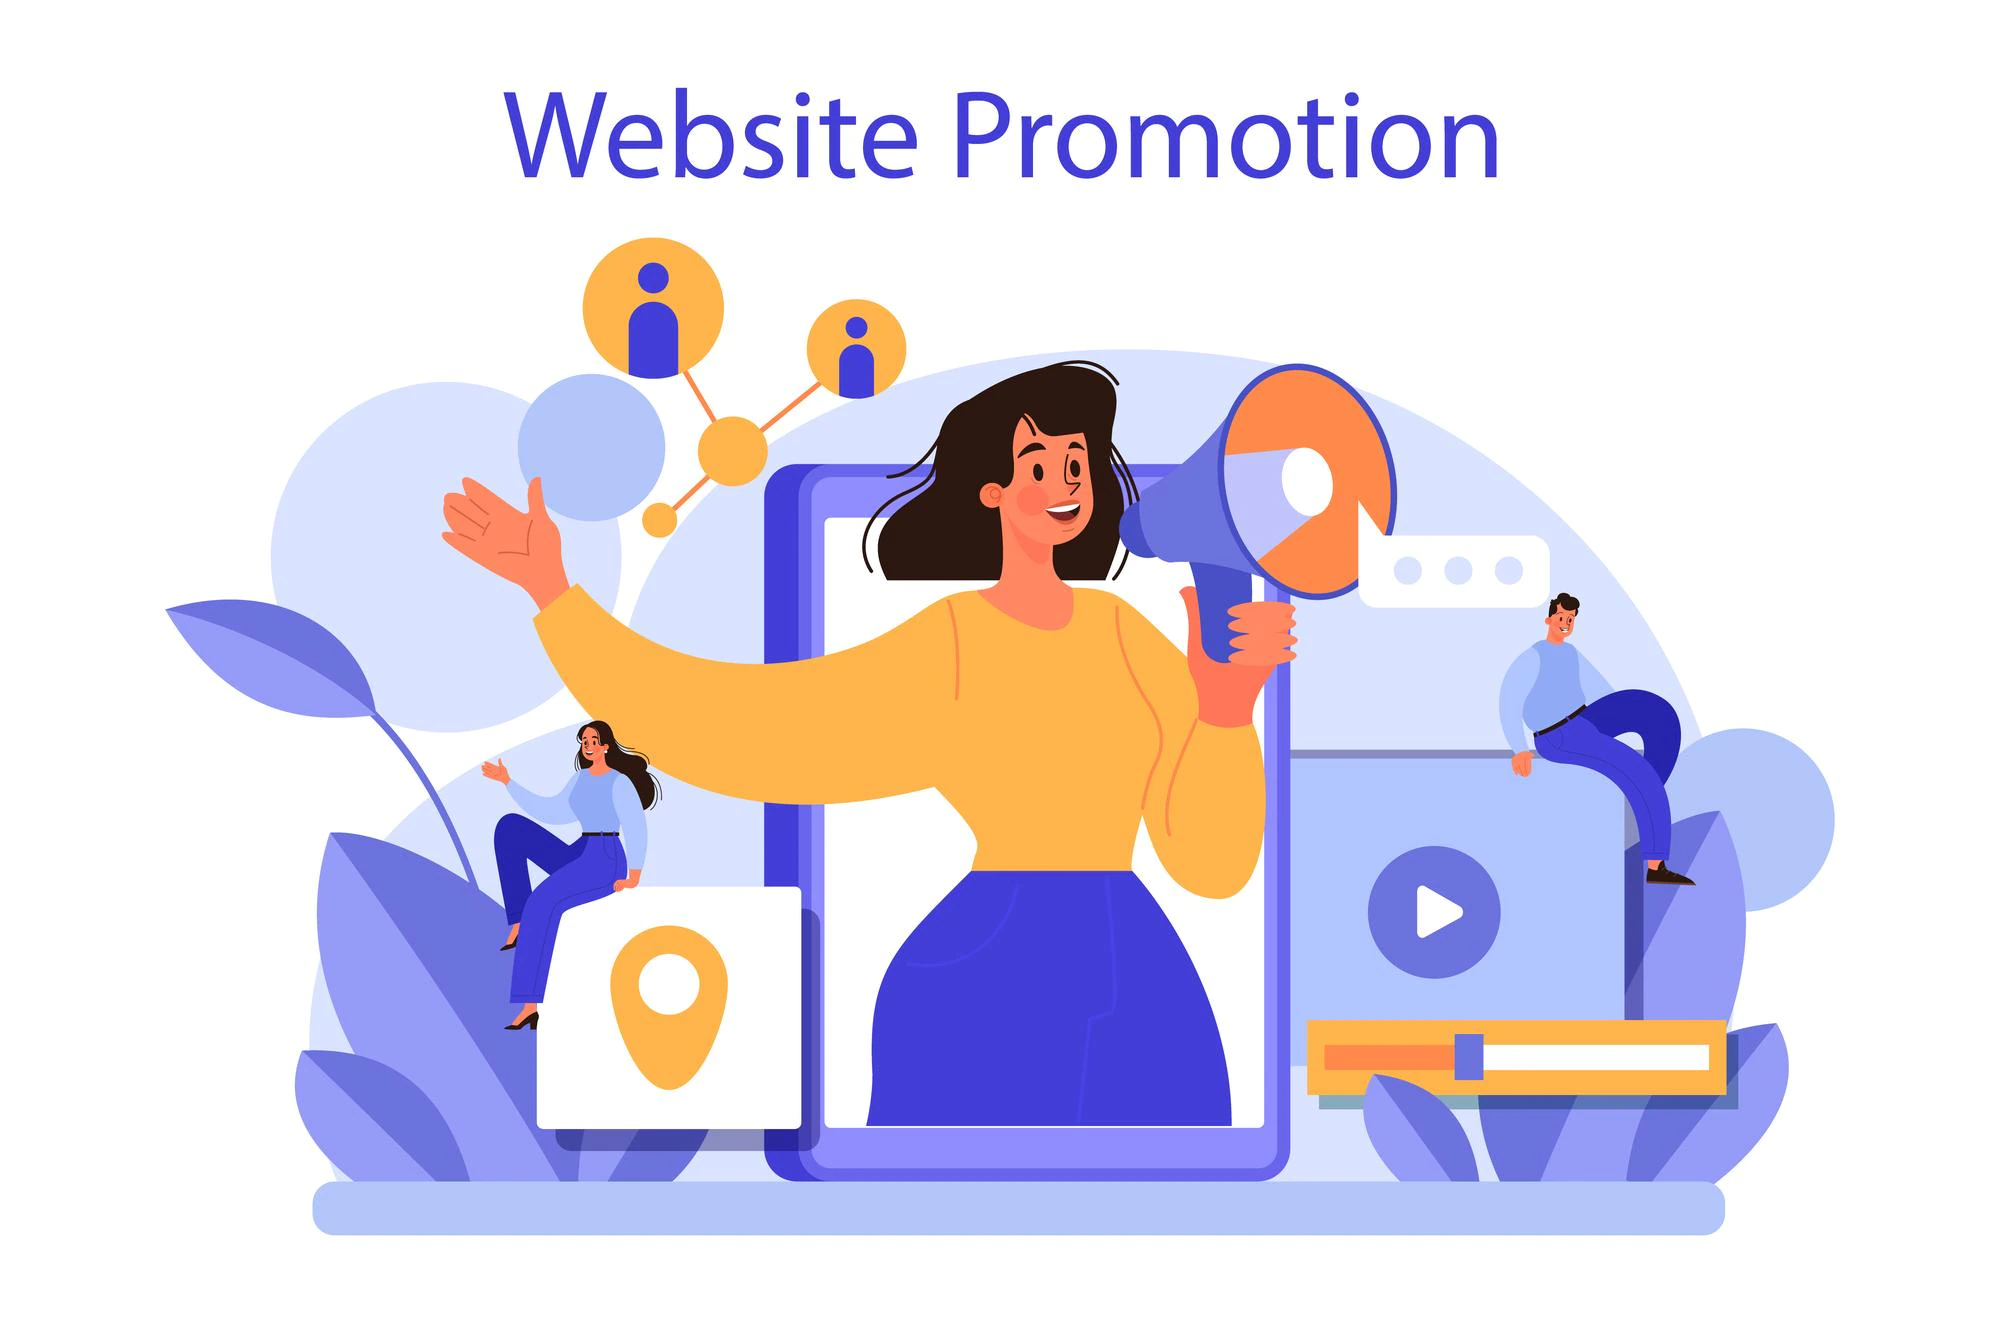 website promotion concept online business promotion with commercial campaign product digital advertising social media marketing isolated flat vector illustration 613284 1993